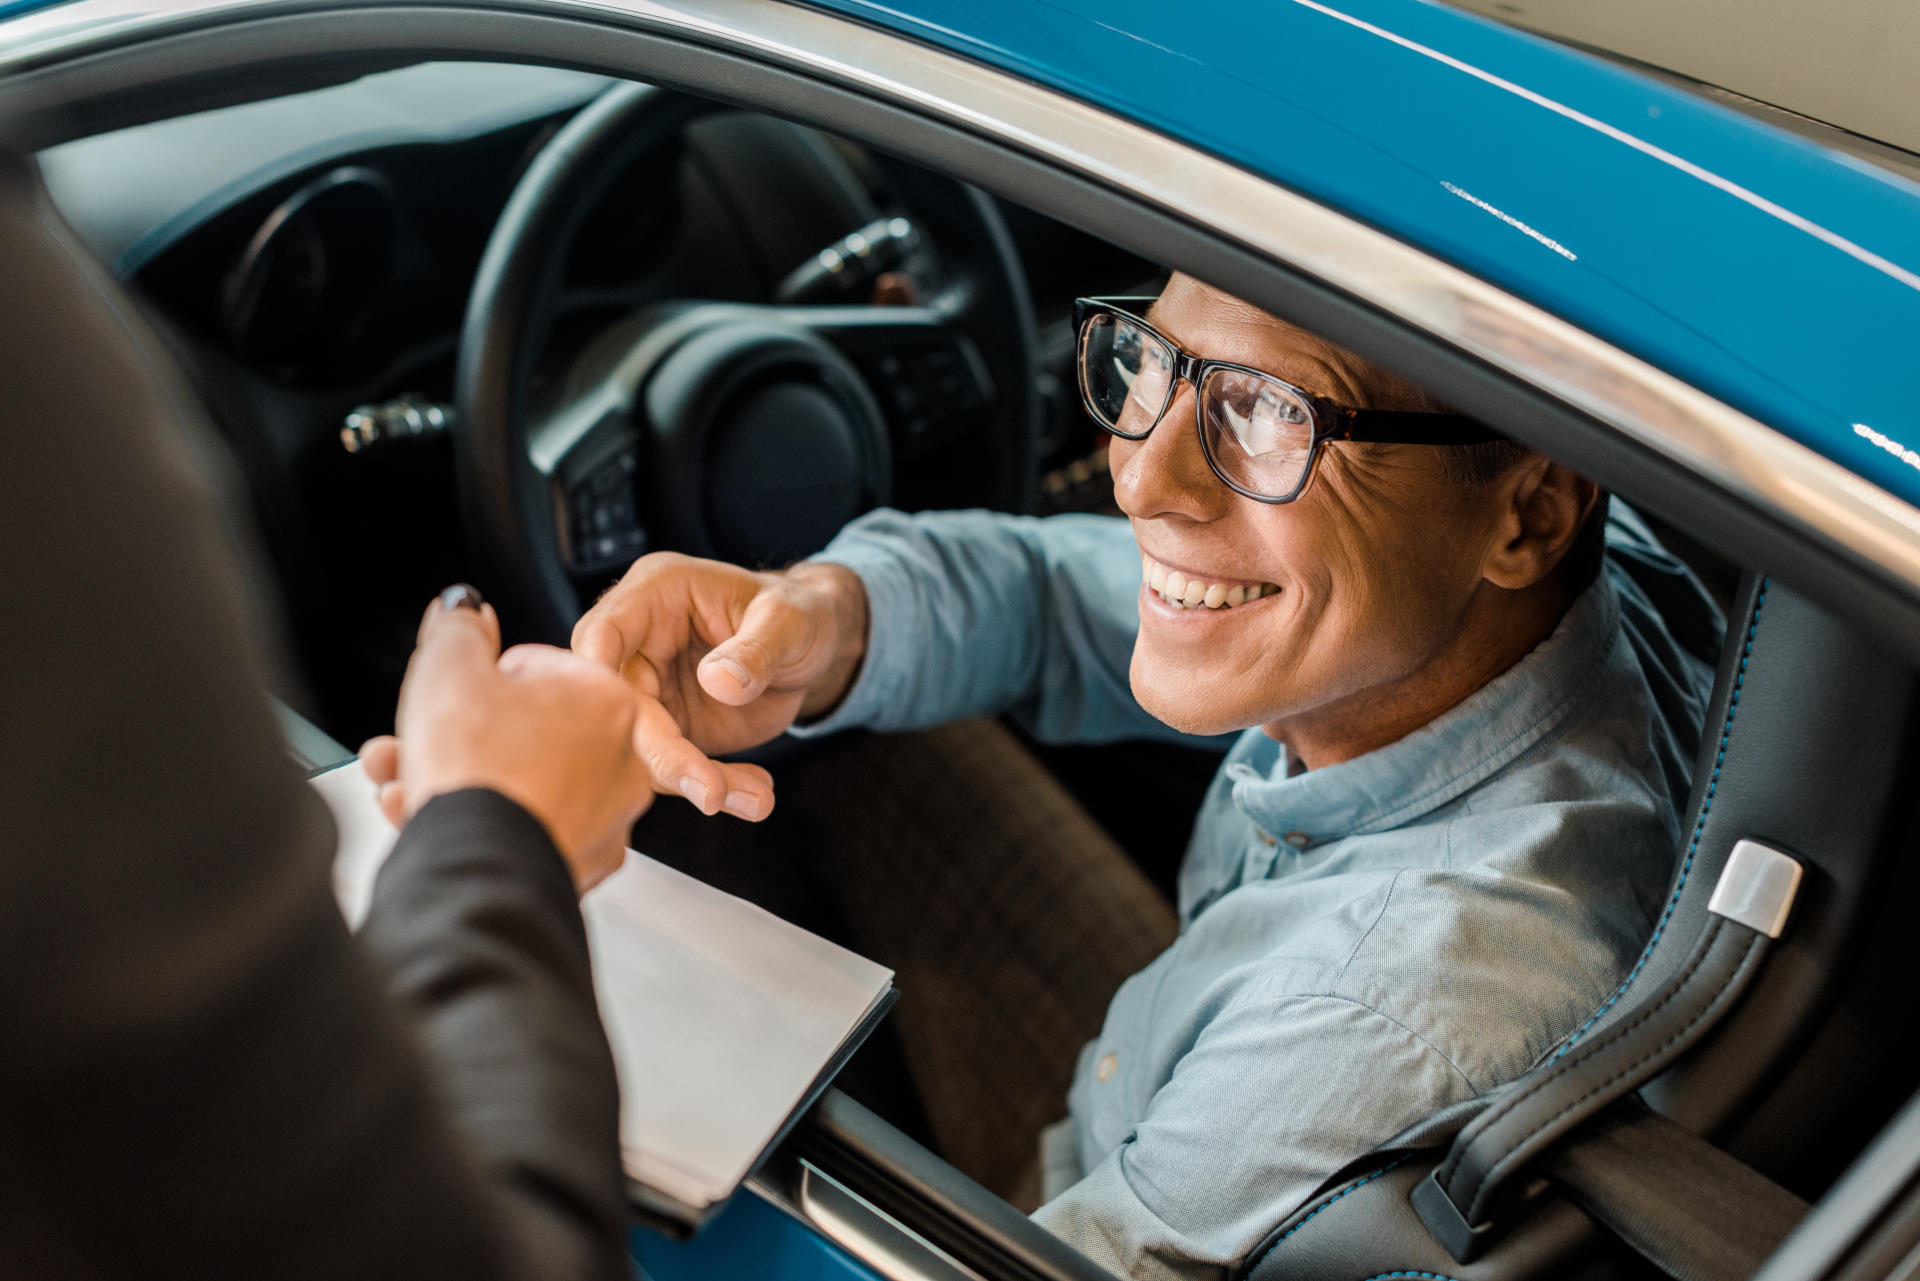 A man look at a used car he's interested in buying